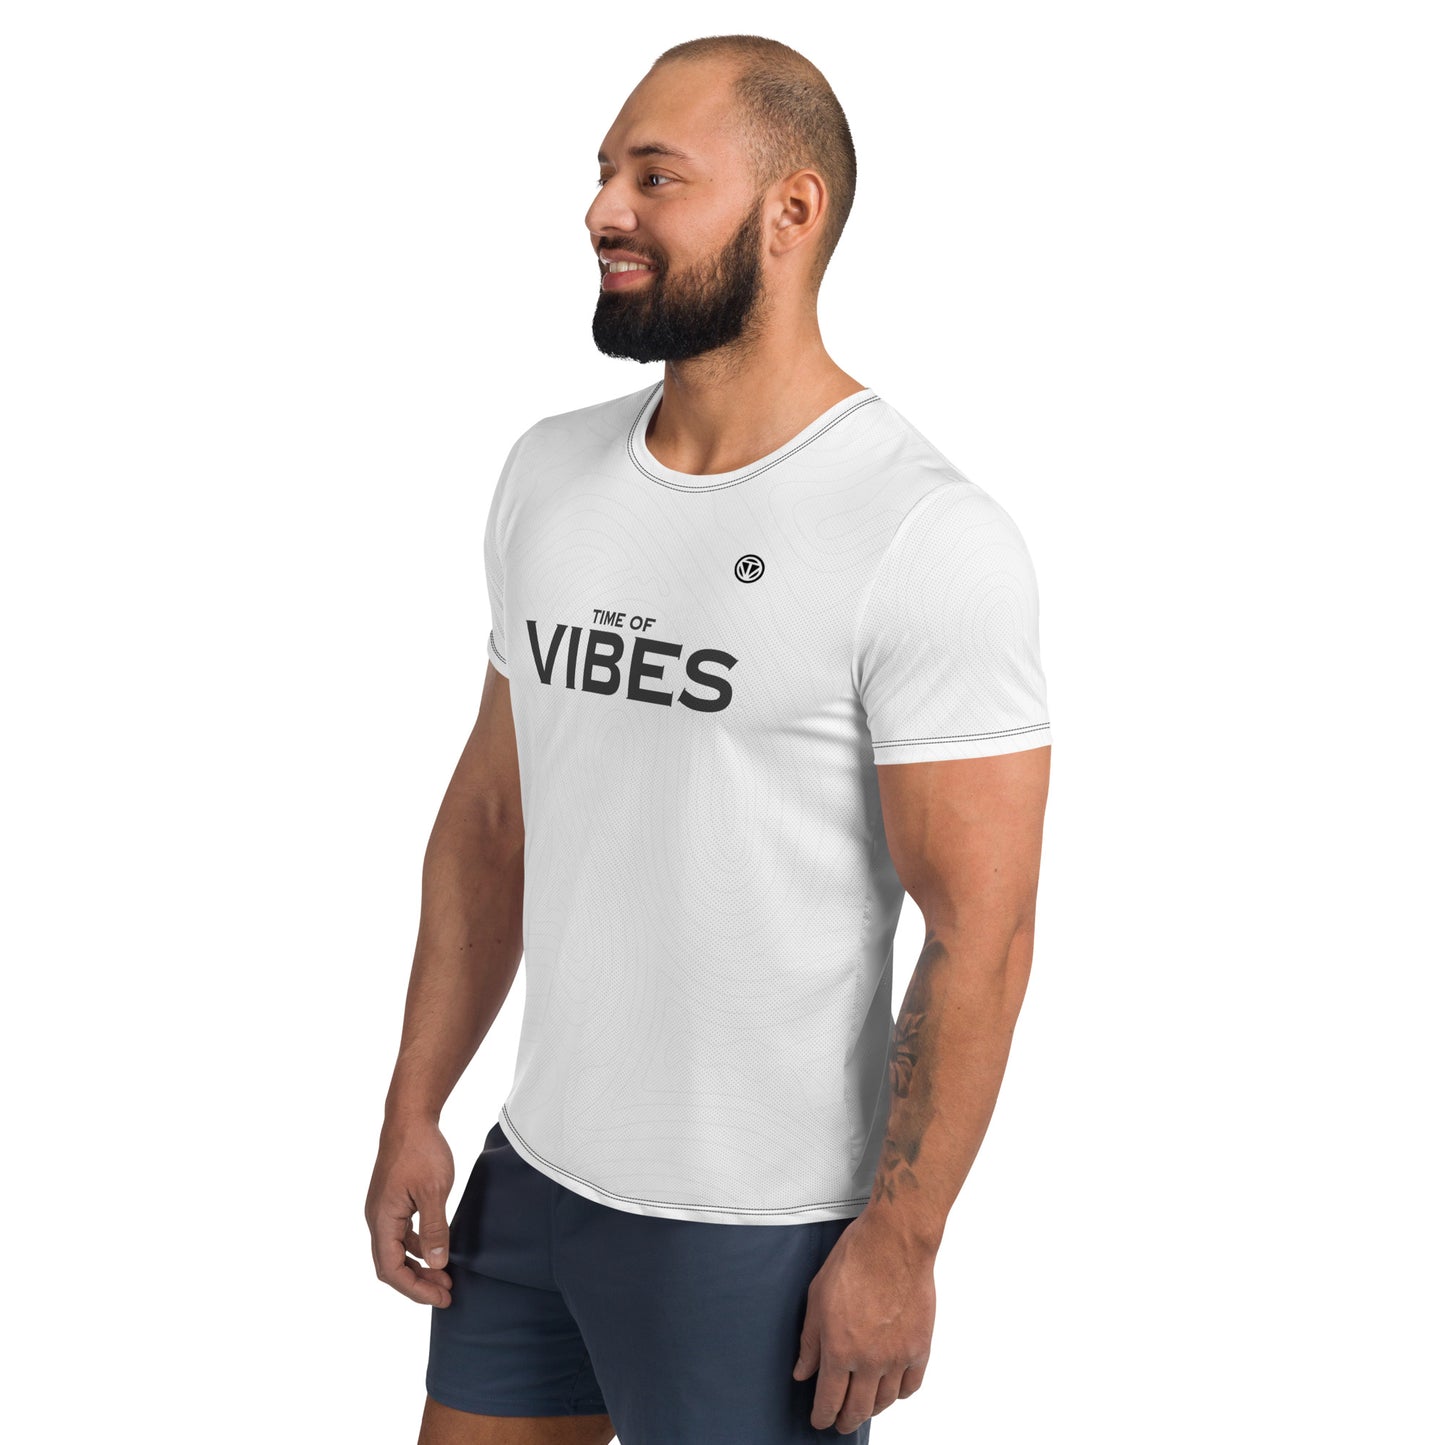 TIME OF VIBES - Men's Athletic T-shirt MOVE (White) - €45.00